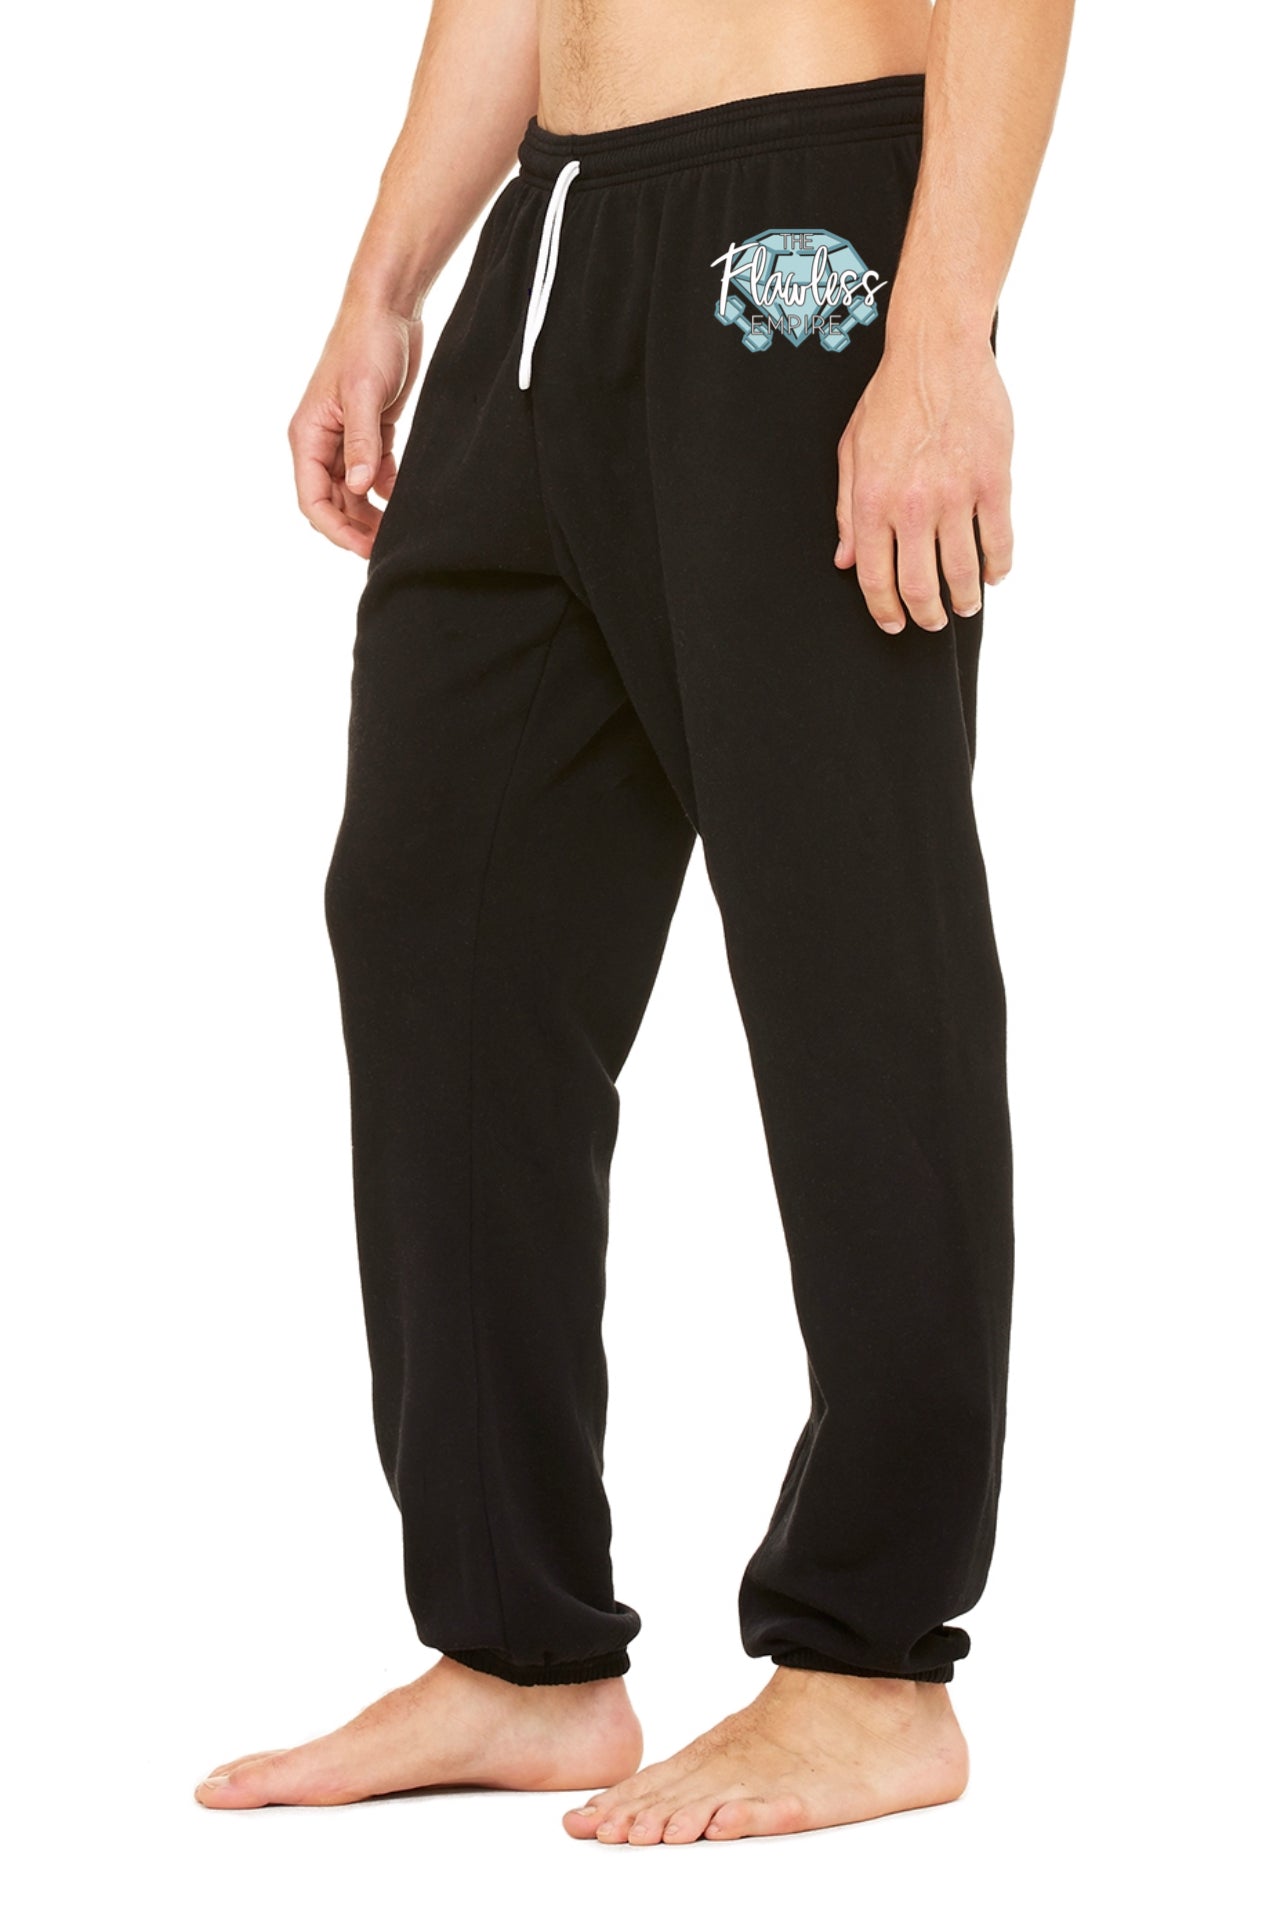 The Flawless Empire Unisex Scrunch Joggers